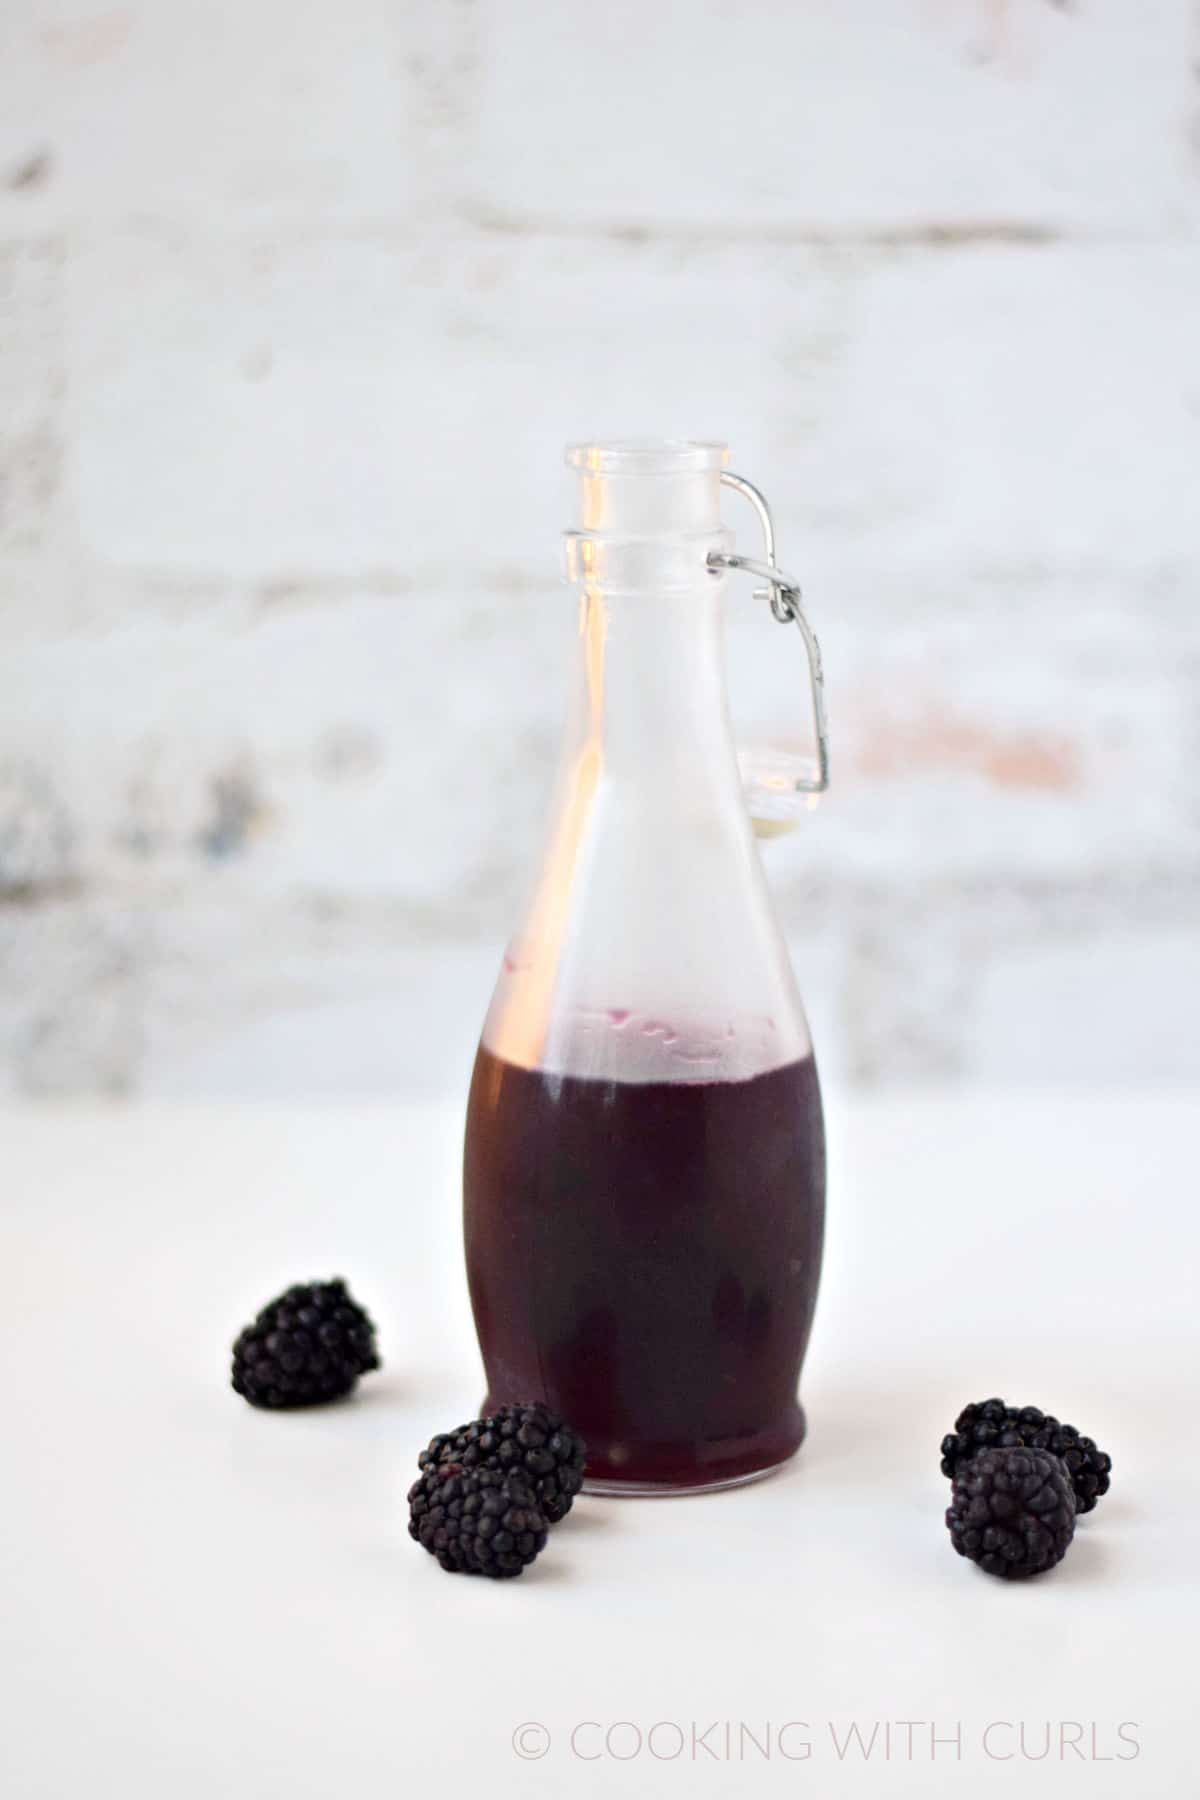 Blackberry syrup in a glass bottle with a swing top lid and fresh berries  scattered below.